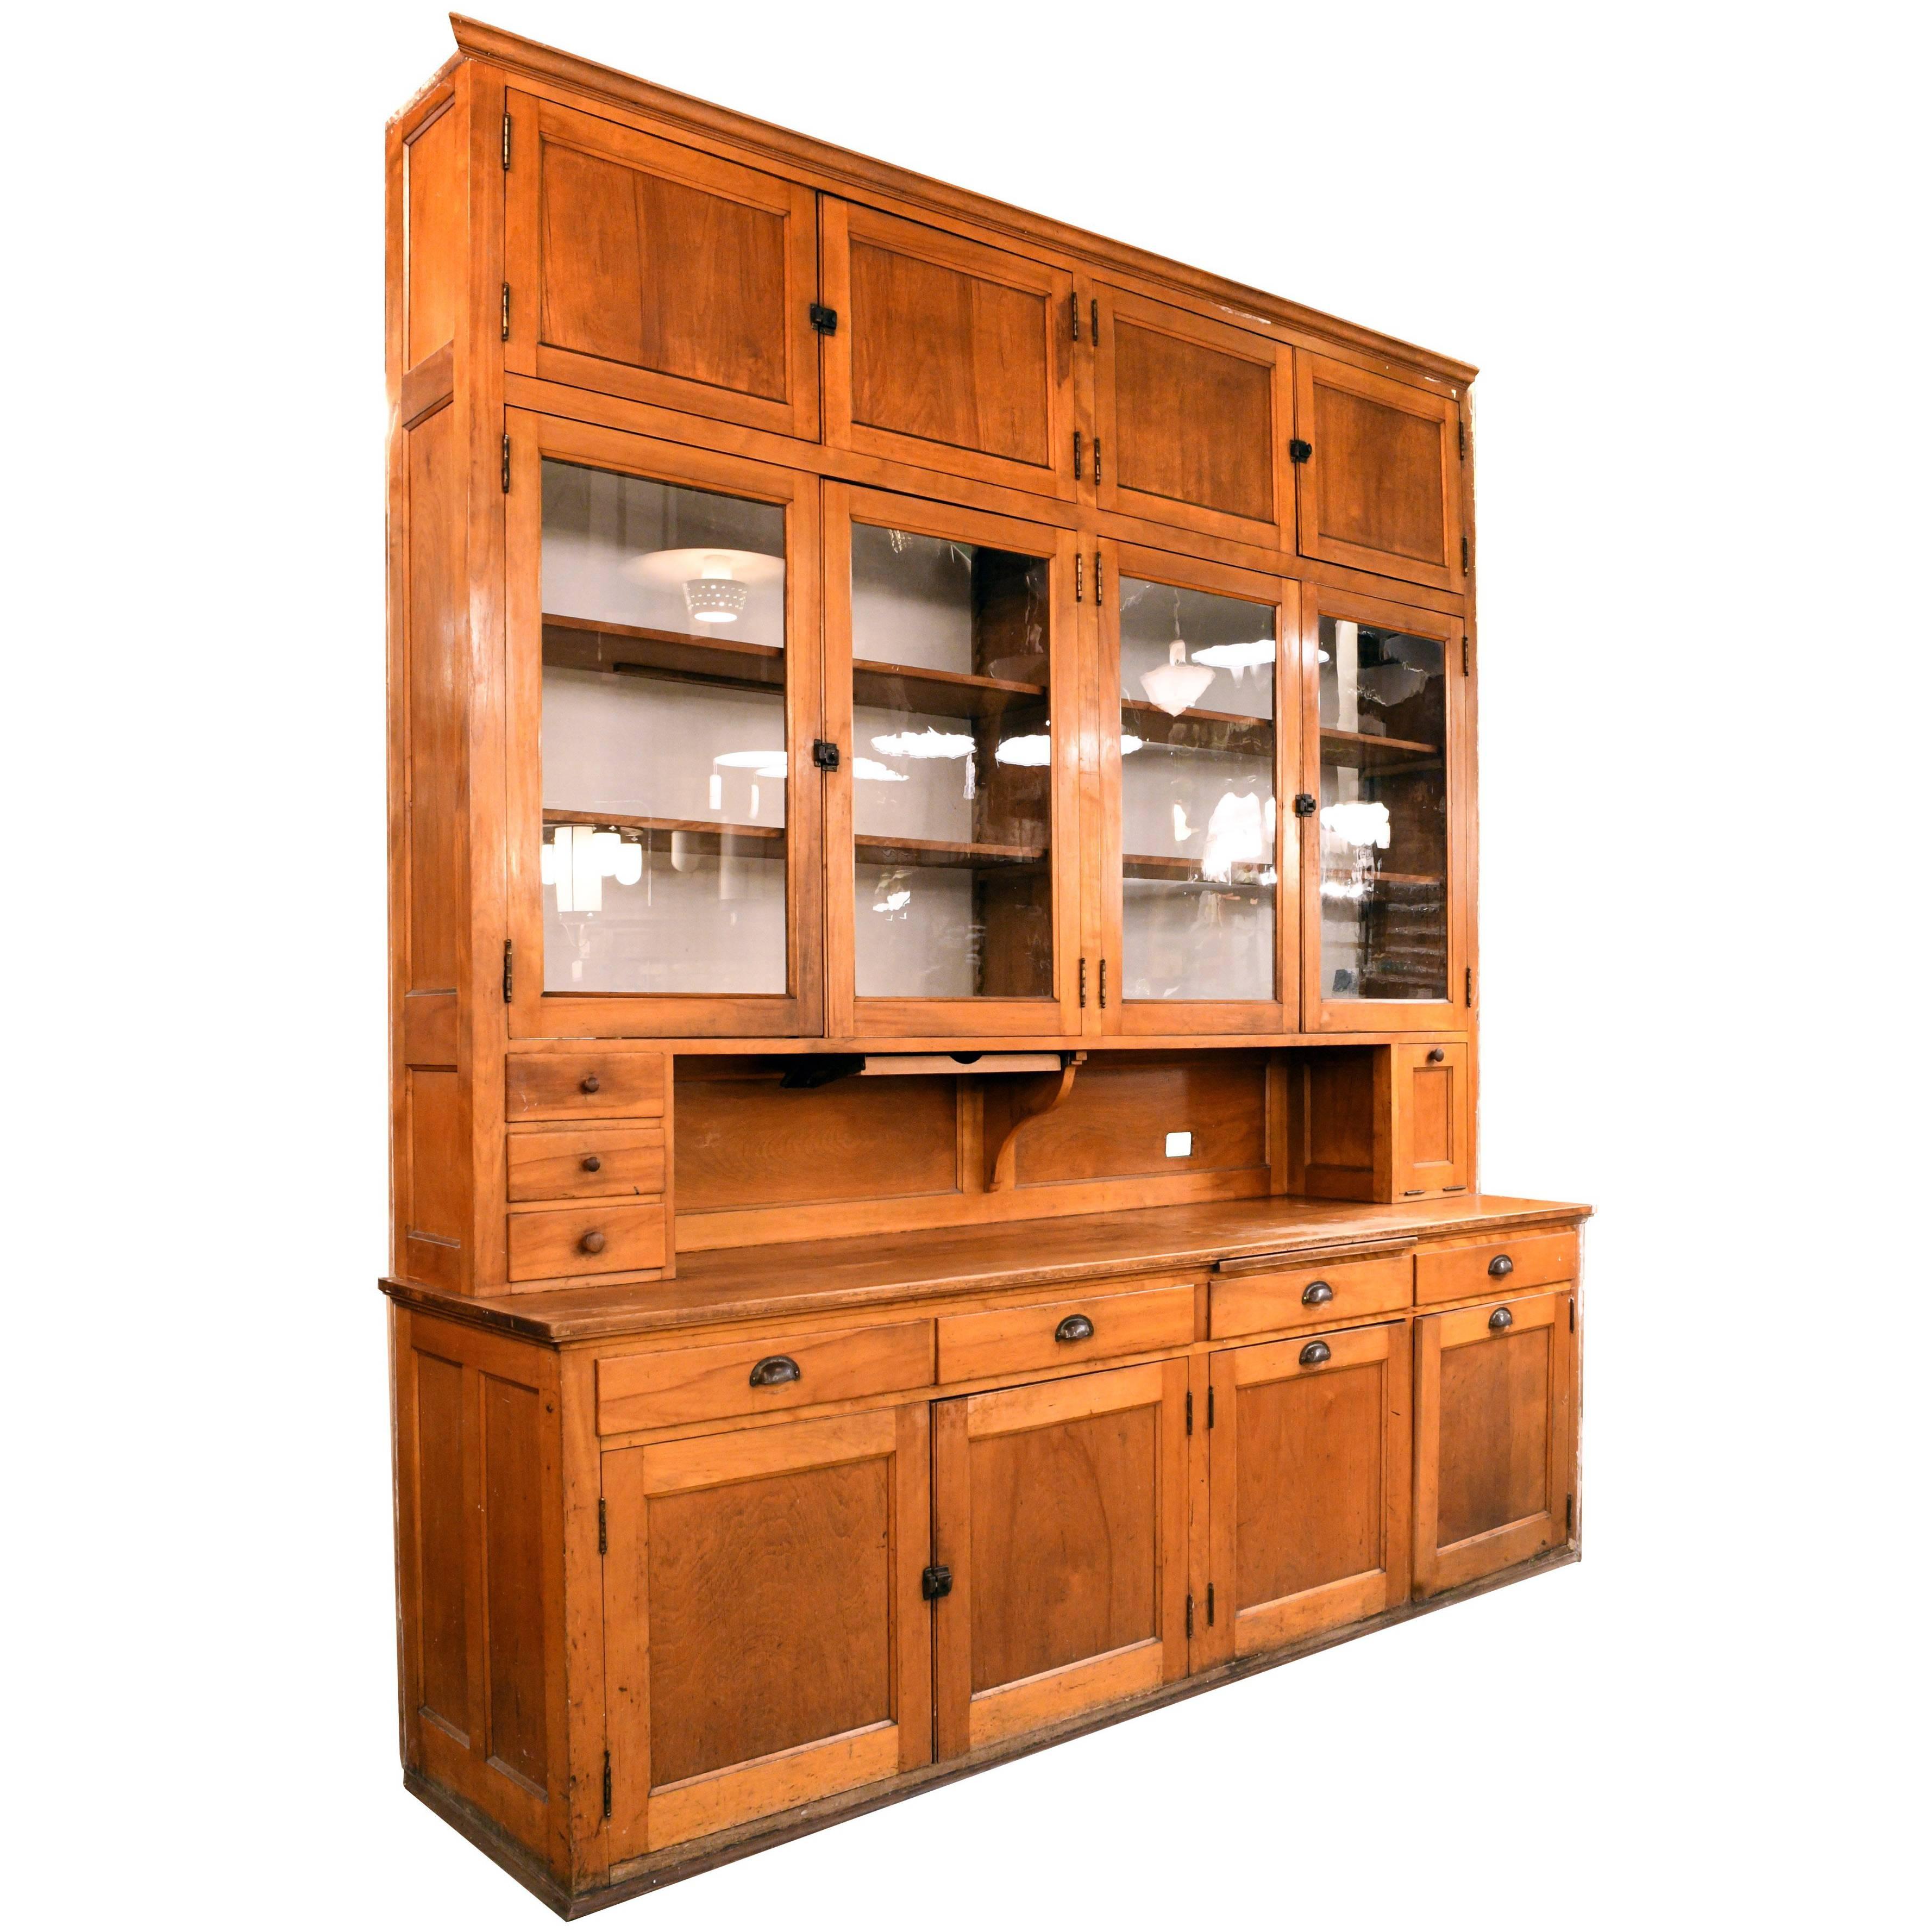 Maple Built-In Kitchen Cabinets